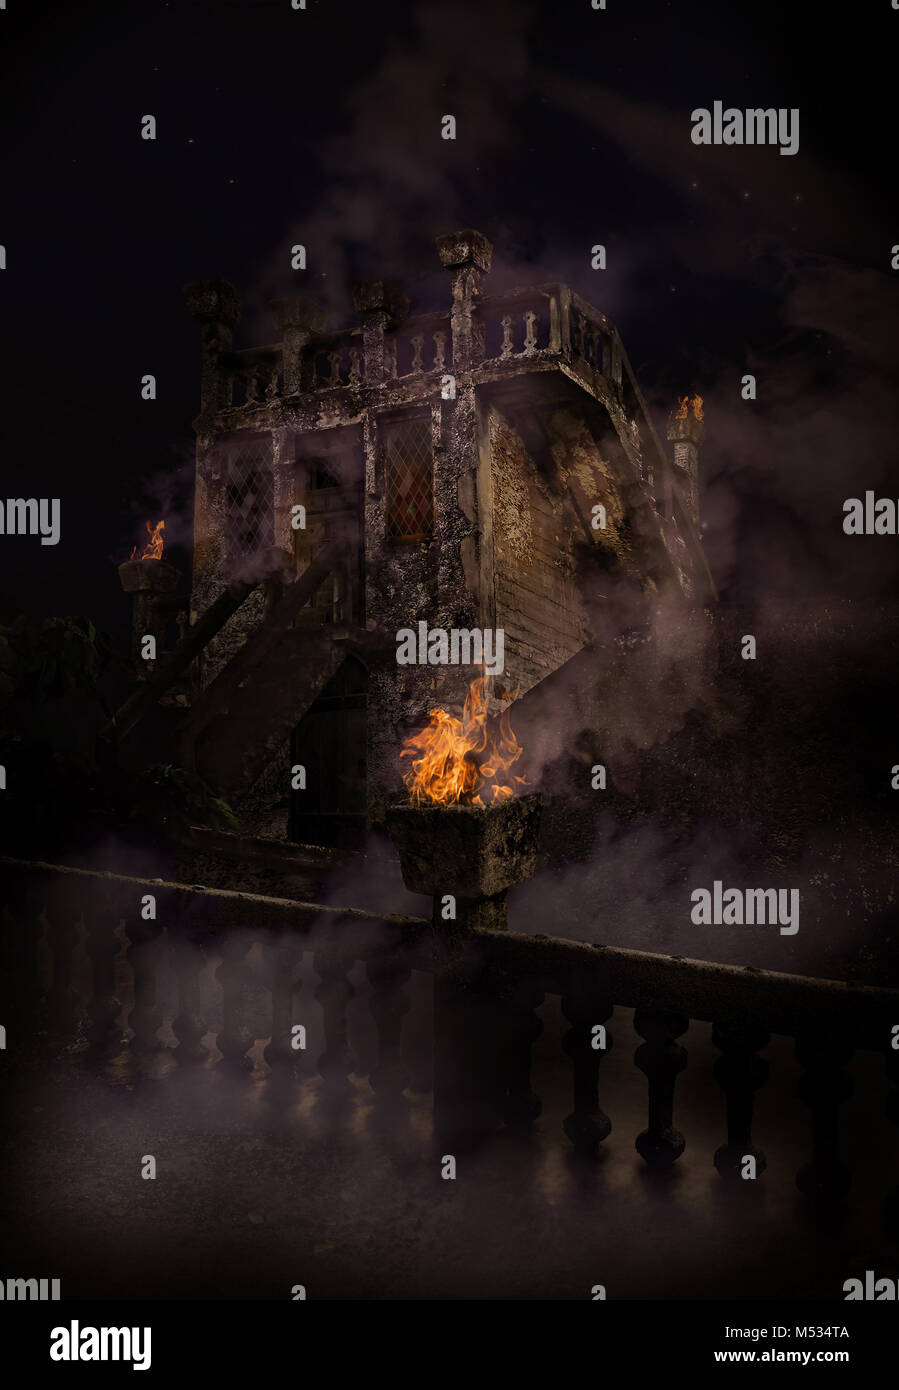 Eerie castle or watch tower at night with fire turrets and smoke Stock Photo